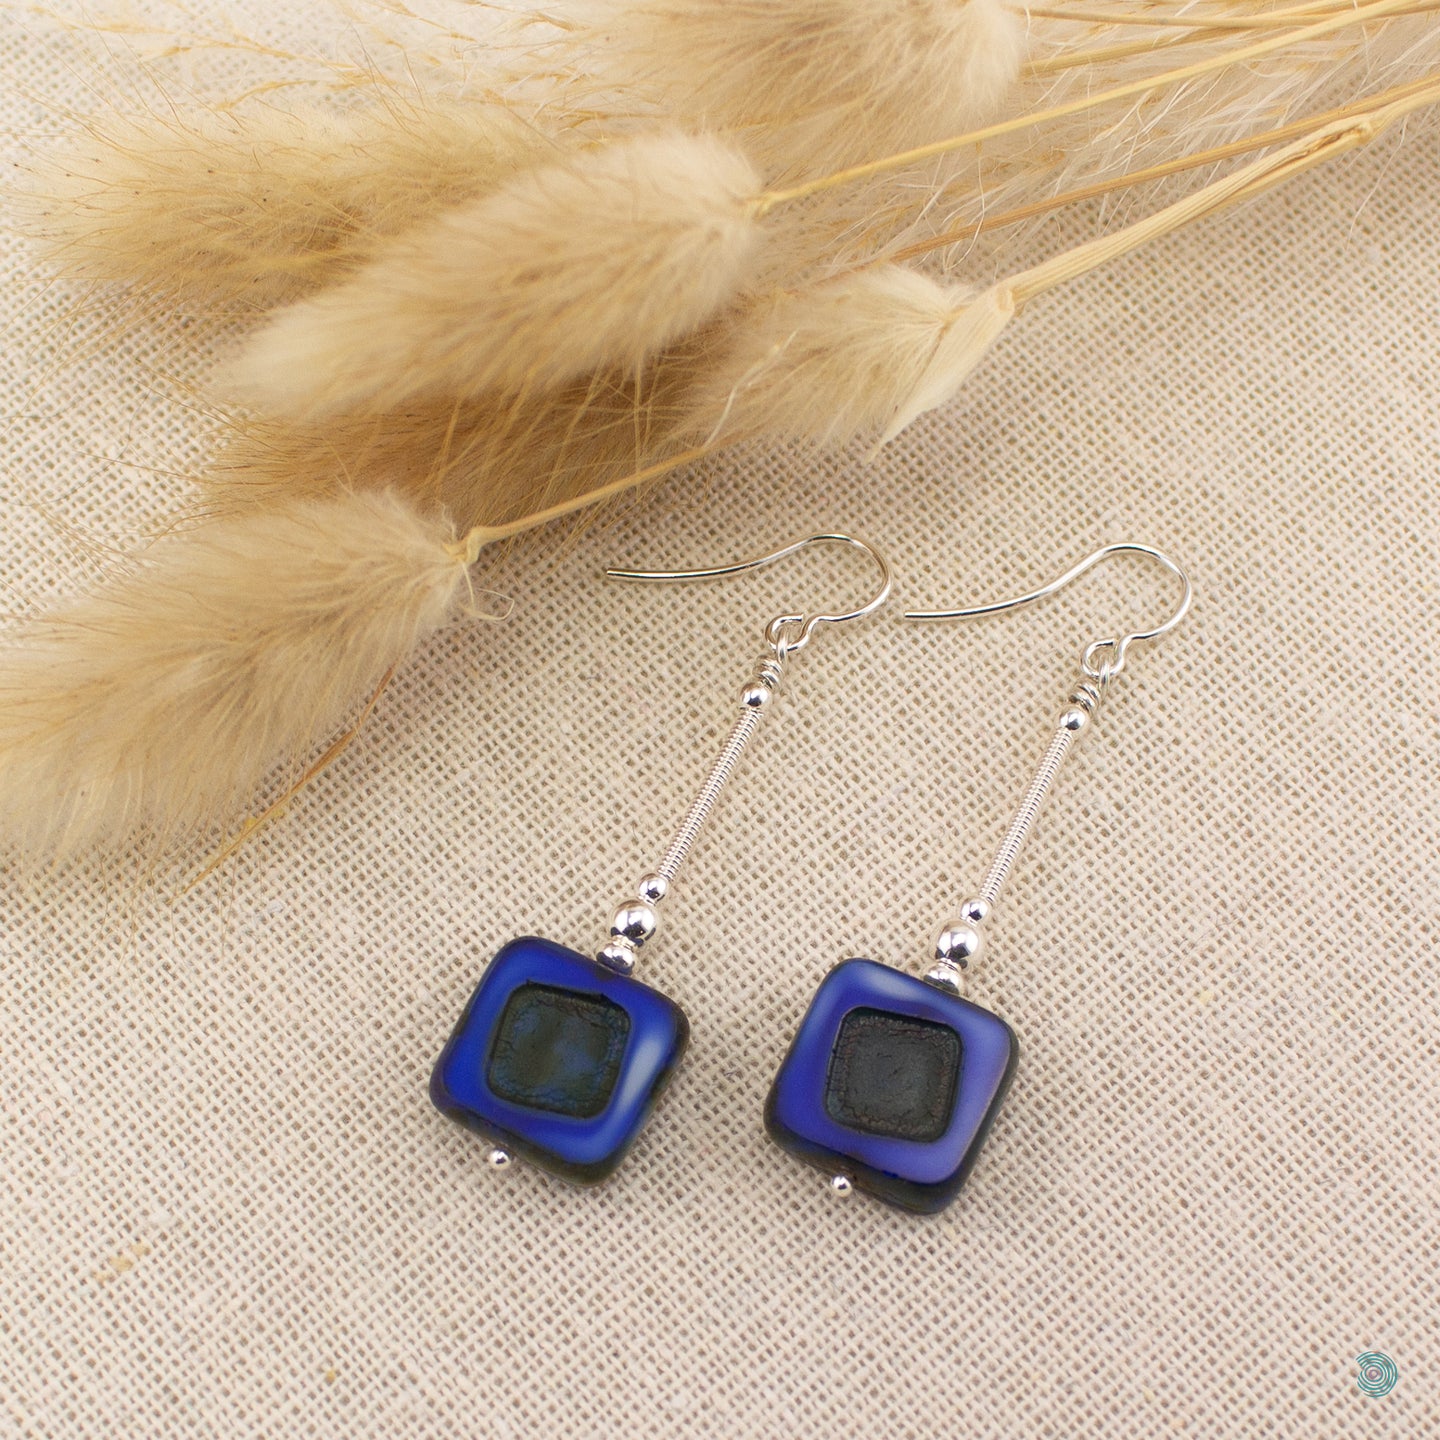 Hand wrapped silver filled drop earrings with a beautiful blue Czech glass squares. These earrings sit on sterling silver ear wires and come with backs included. They are approximately 4cm in drop length from the base of the ear wires and are presented in a pretty gift pouch for safe keeping. Designed and handmade in Dingle